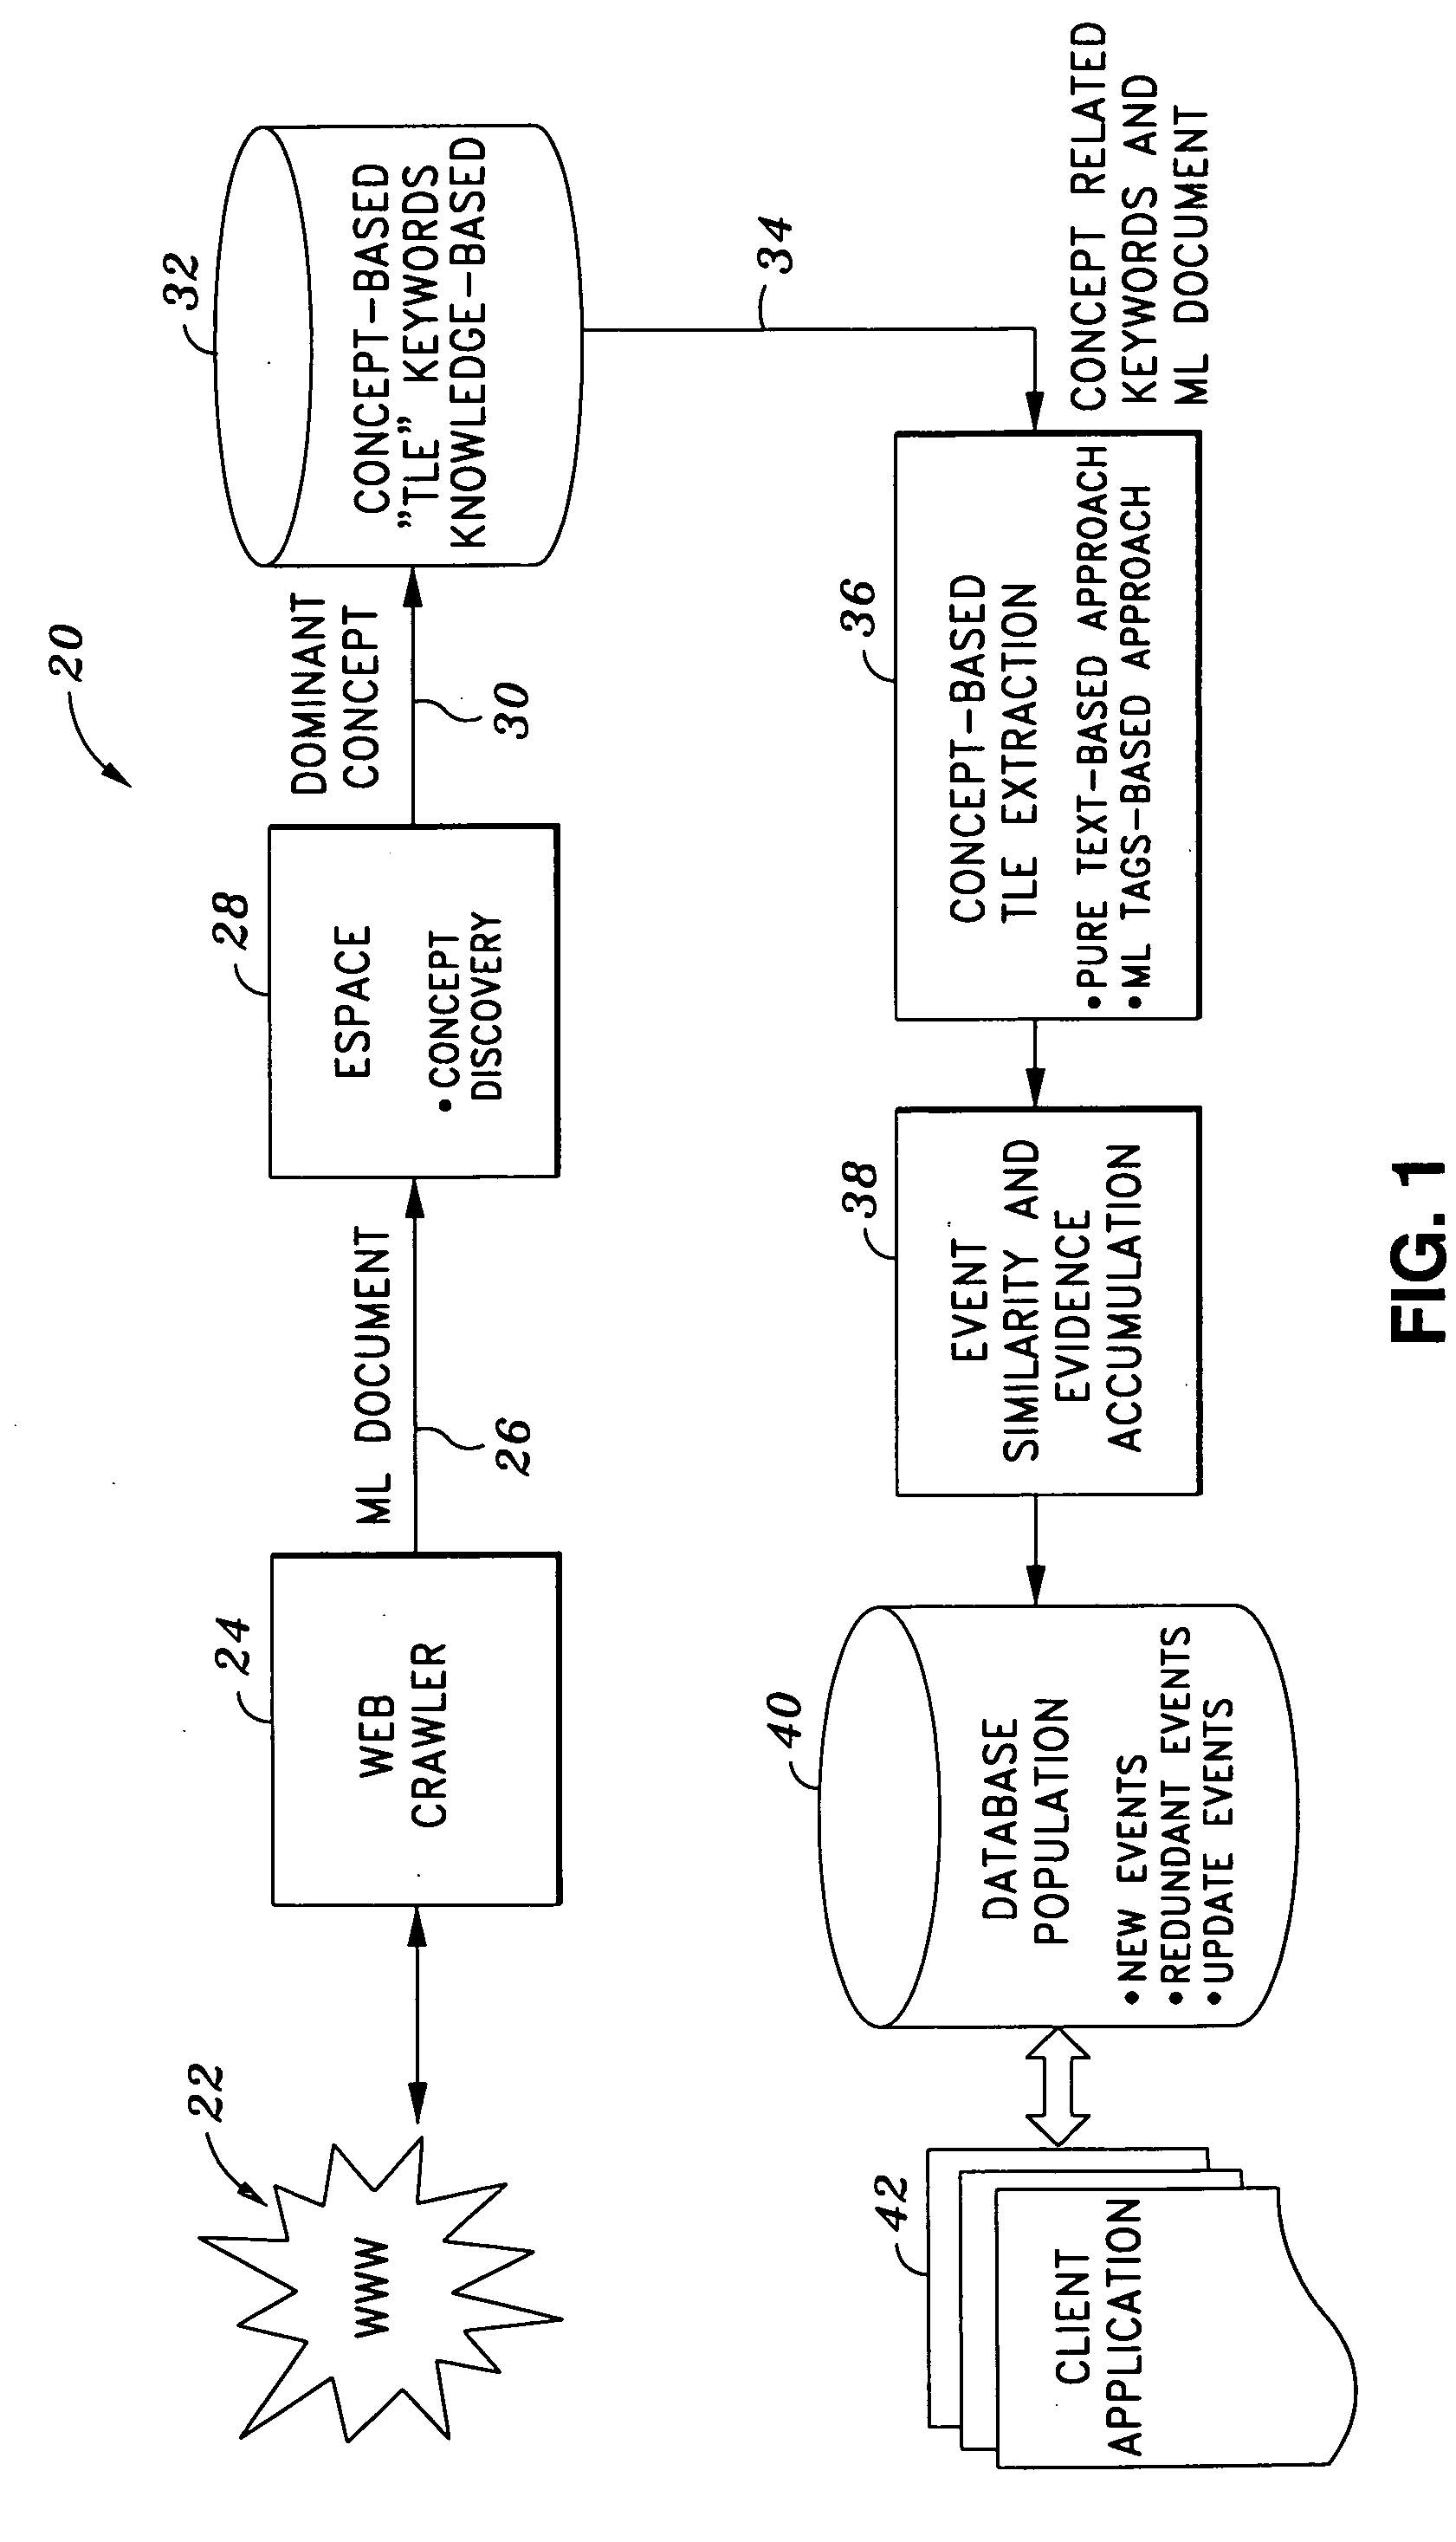 Method and apparatus for electronically extracting application specific multidimensional information from documents selected from a set of documents electronically extracted from a library of electronically searchable documents